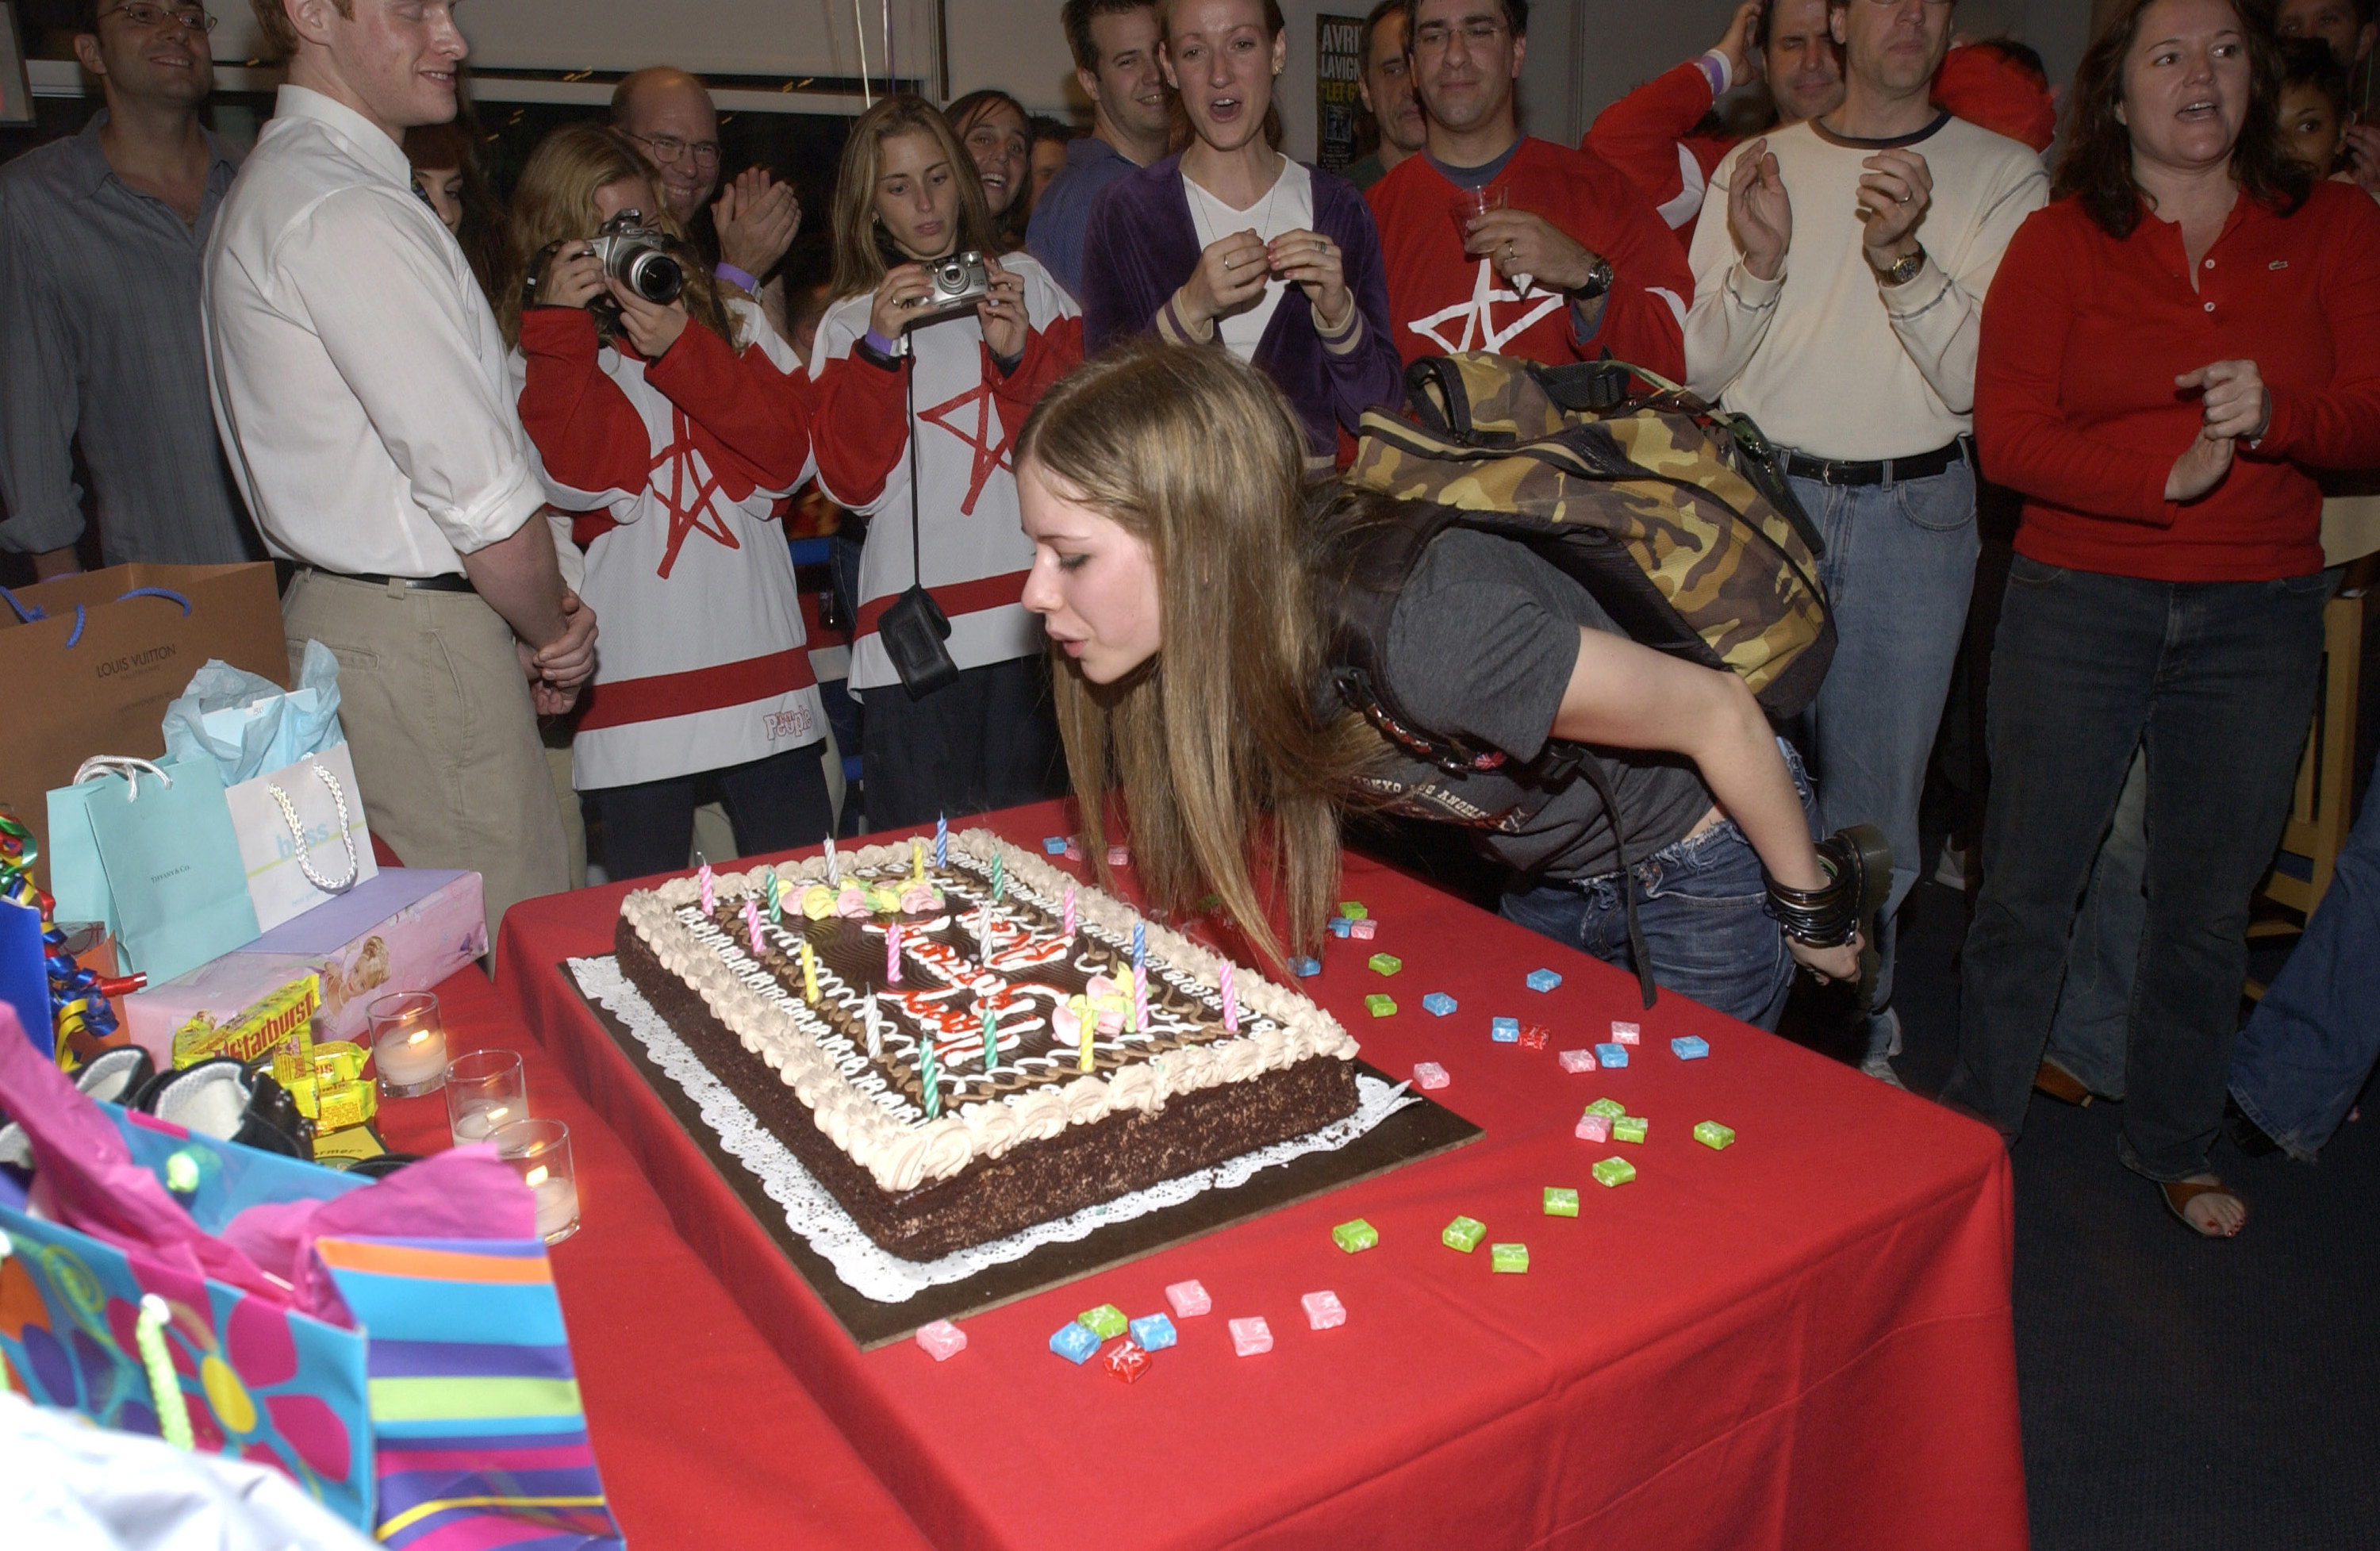 Avril Lavigne blows out her birthday cake candles surrounded by fans taking pictures